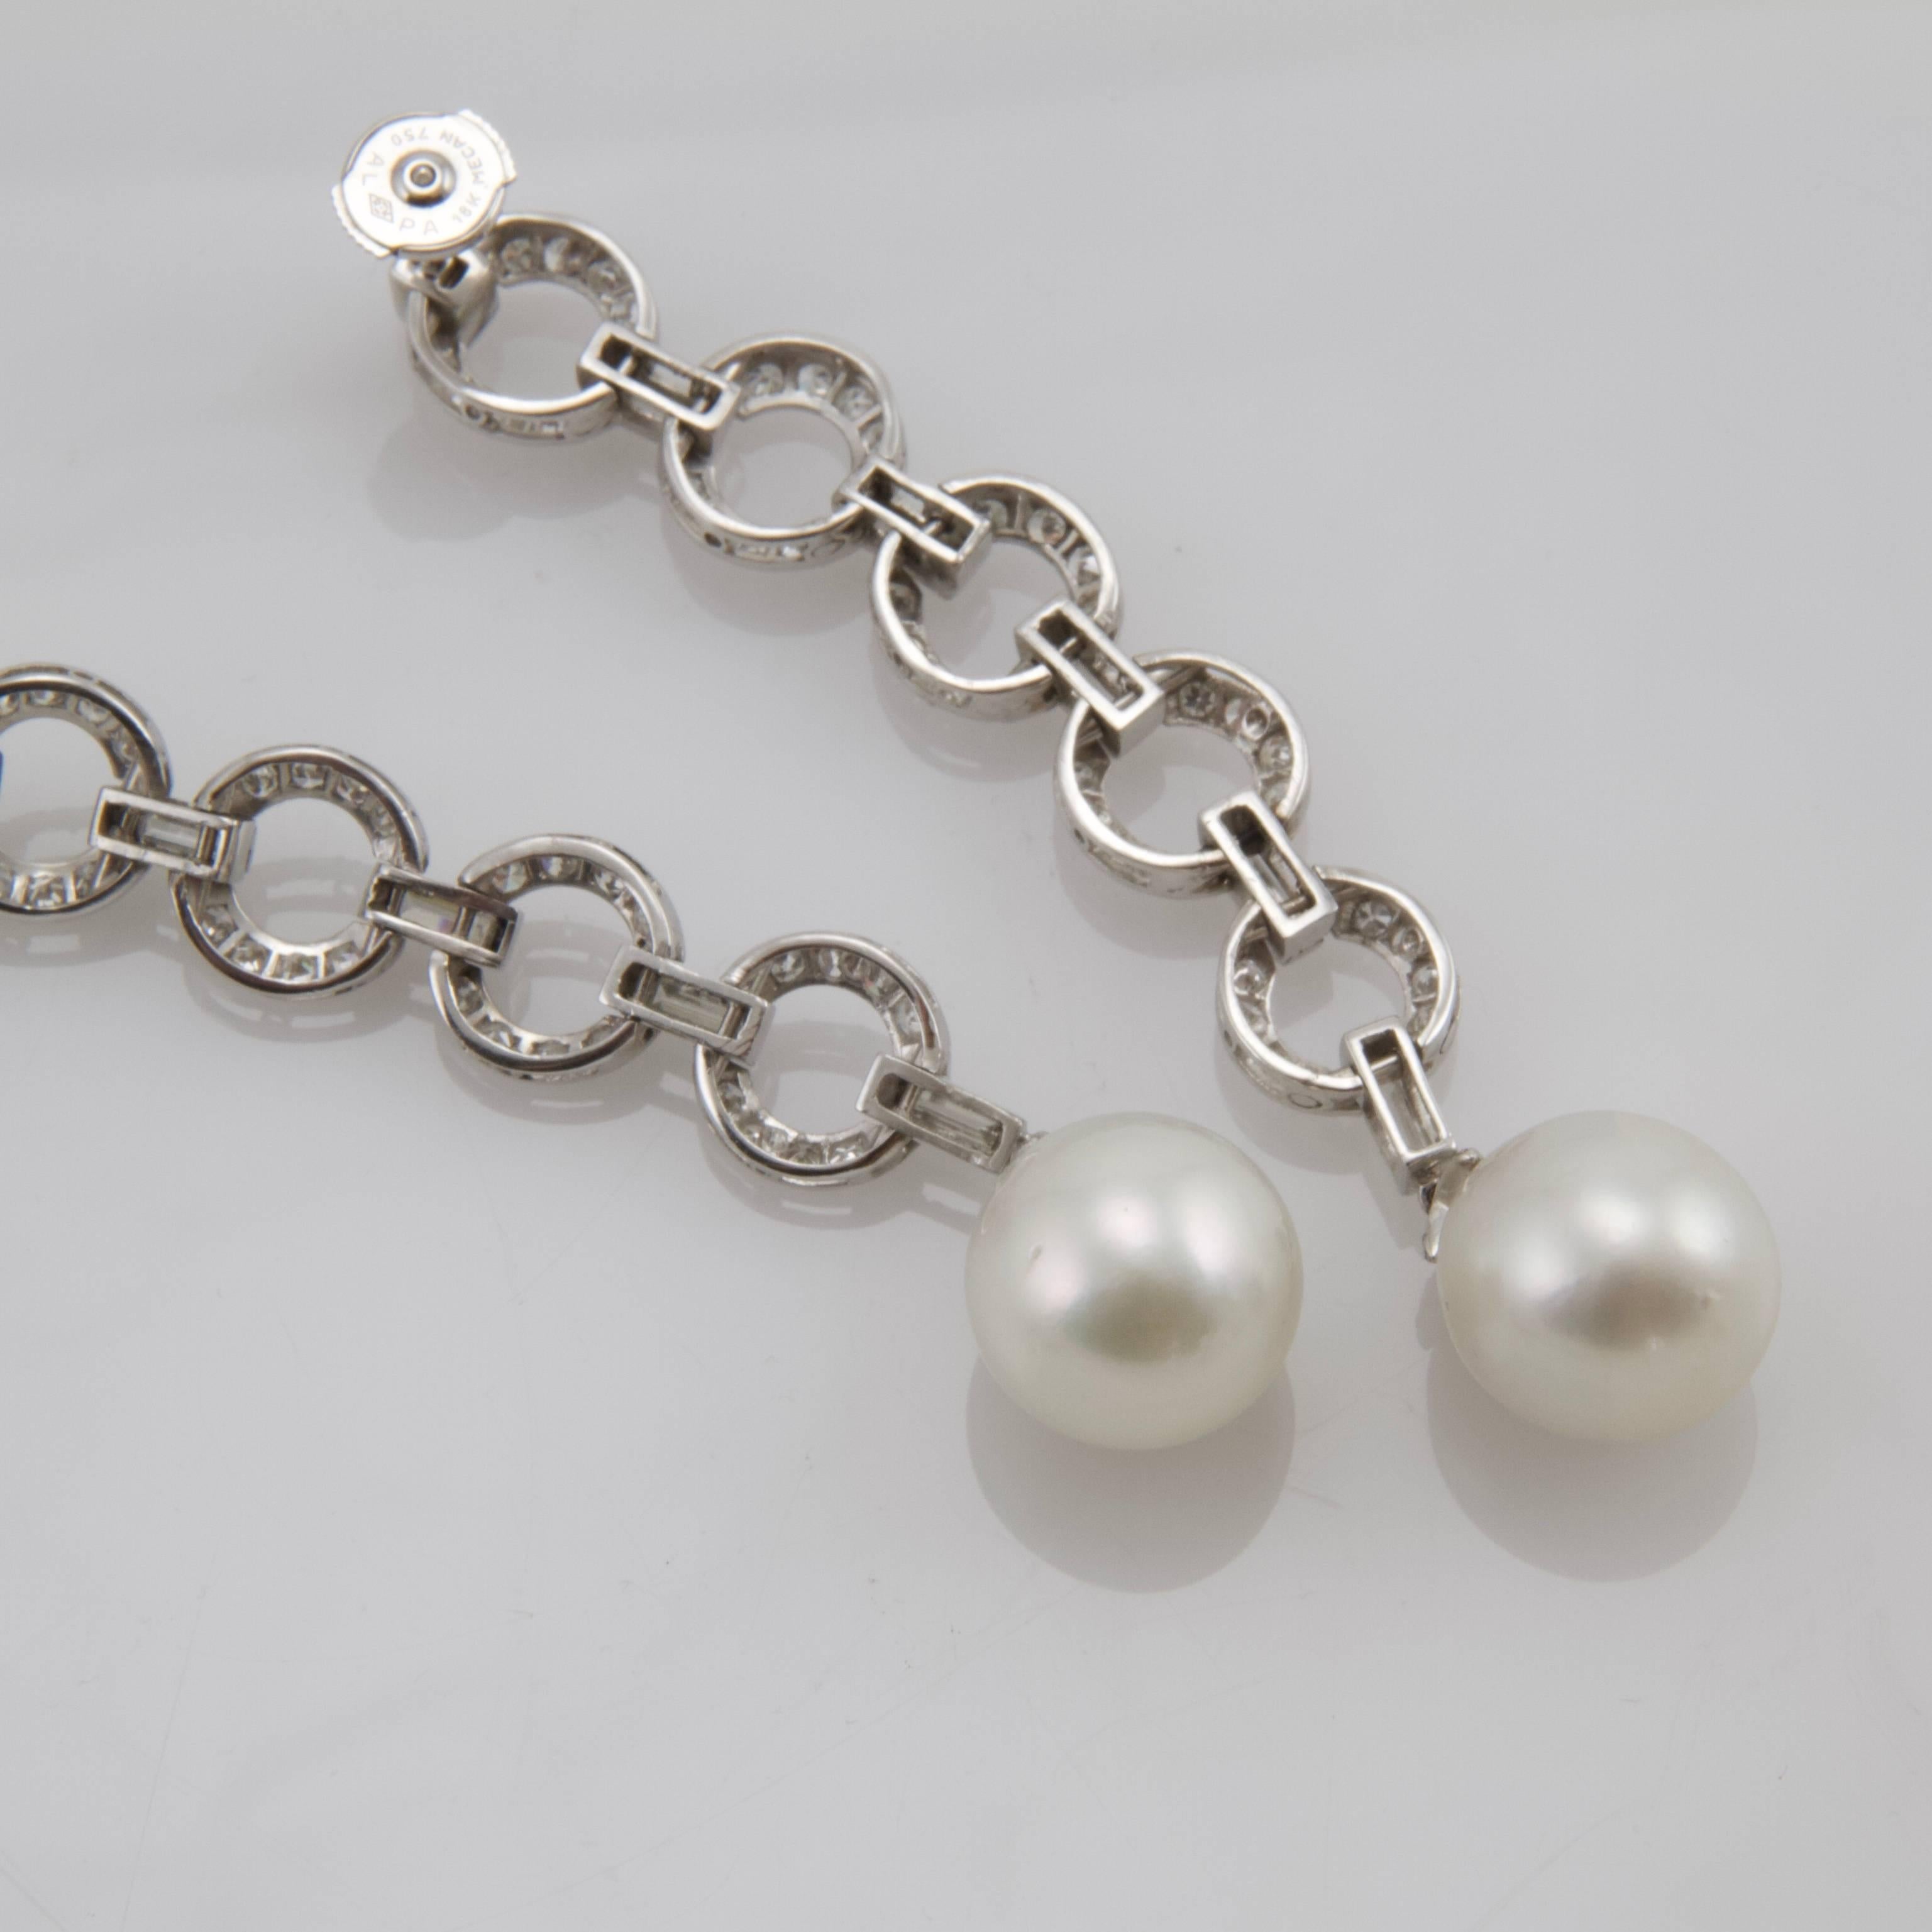 Art Deco Diamond and Cultured-Pearl Earrings from Paris, 1925 For Sale 2